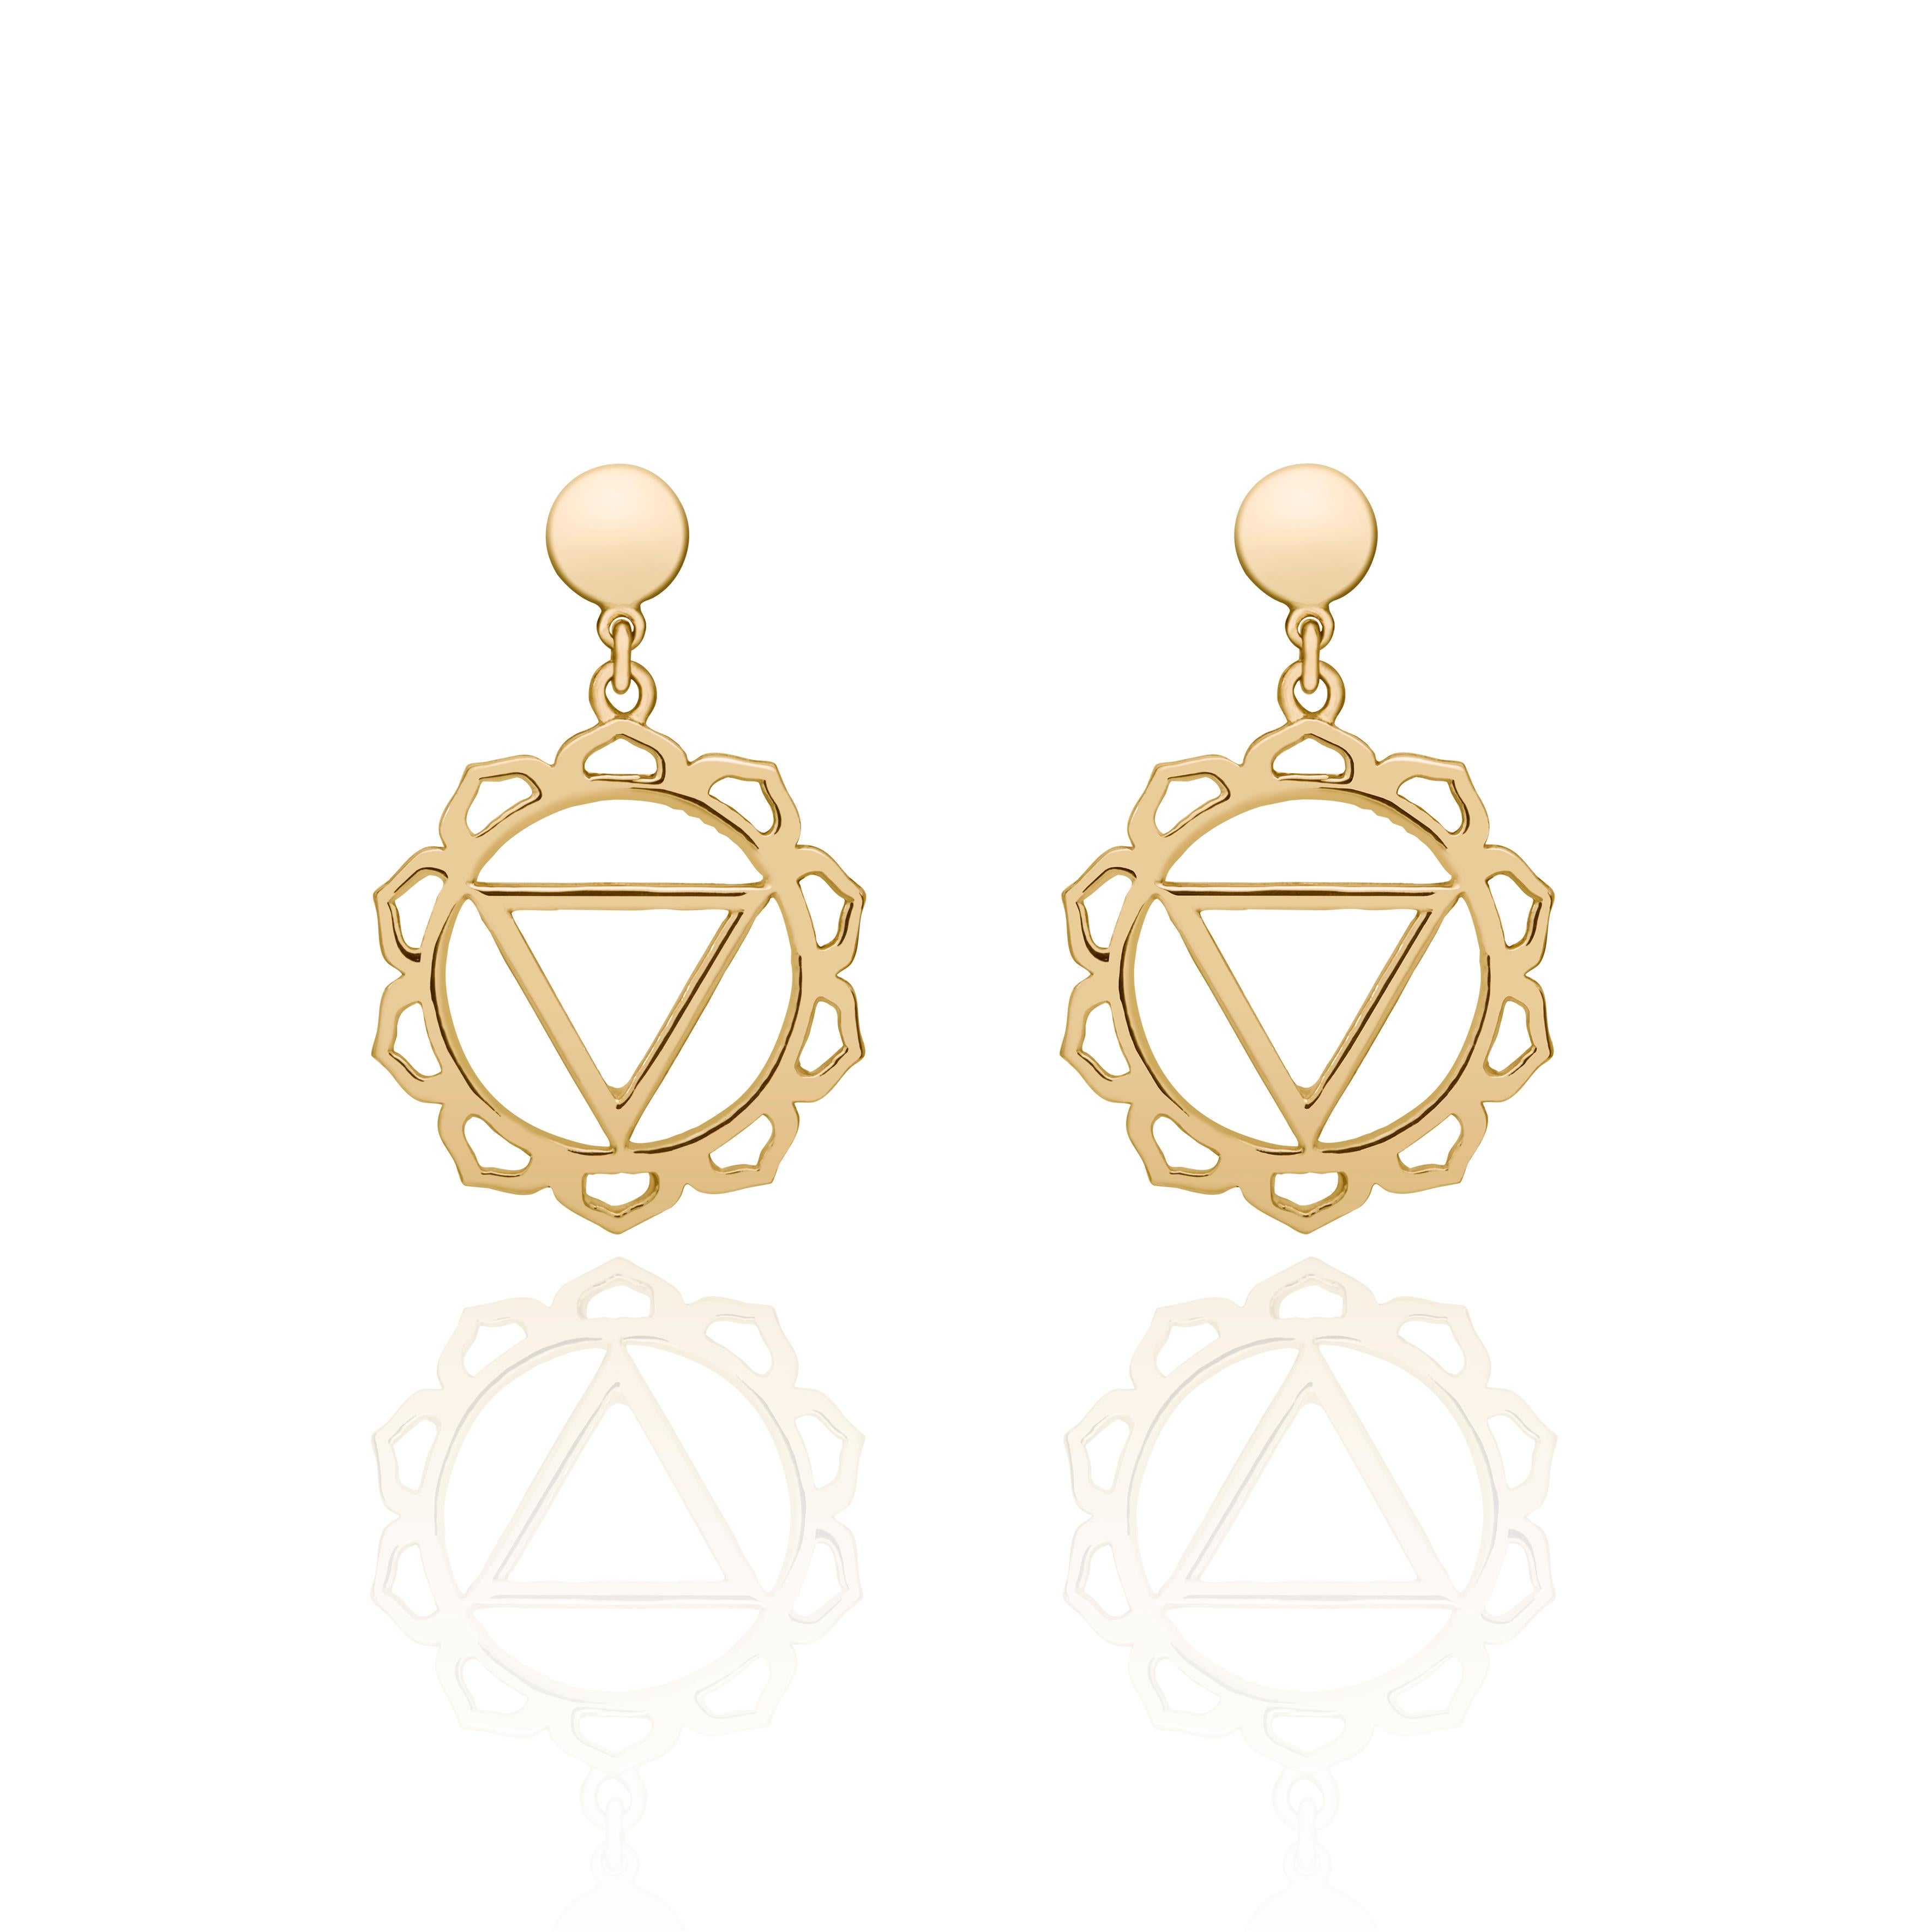 Unique pair of drop earrings inspired by Yoga Manipura Chakra -The Solar Plexus Chakra handcrafted in 14Kt gold. The Manipura Chakra is the mental center of our body that is located in your navel. It is strongly connected with power, humor, trust